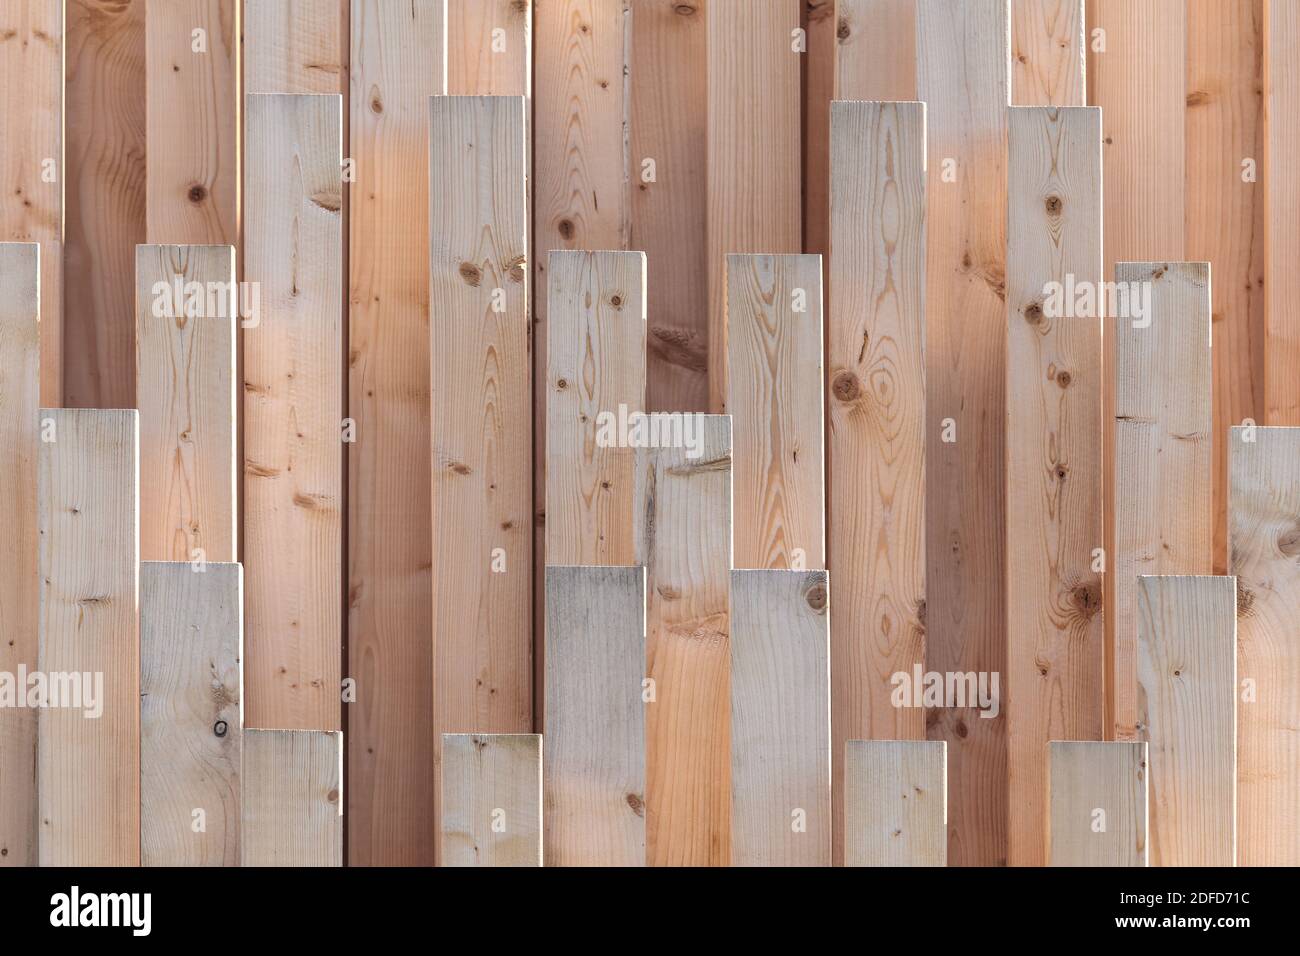 Vertical row of new wooden girders with different lenghts Stock Photo